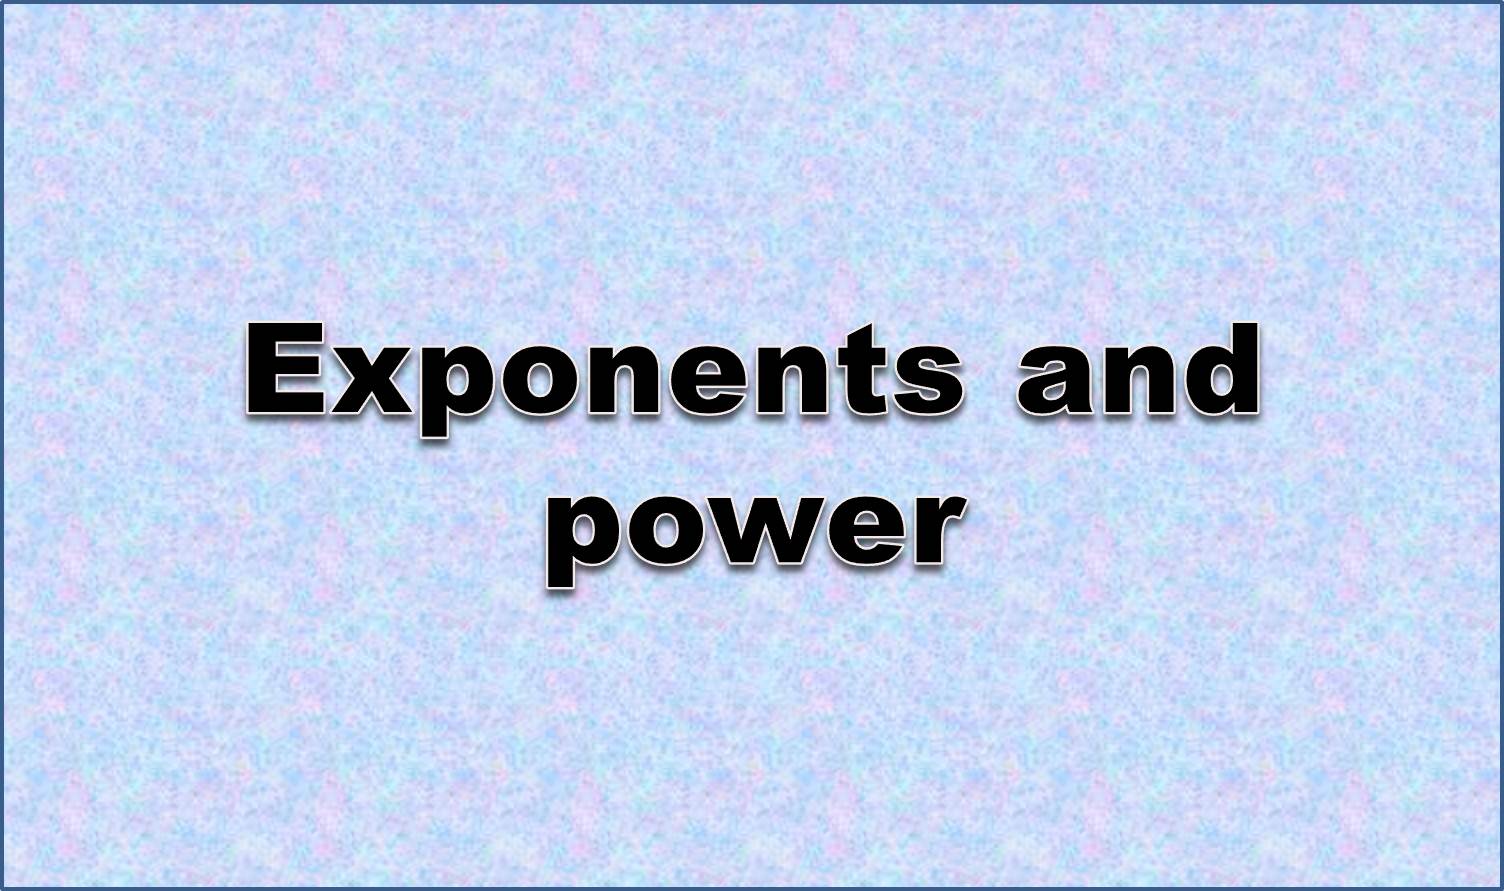 http://study.aisectonline.com/images/Worked examples-Exponent properties.jpg